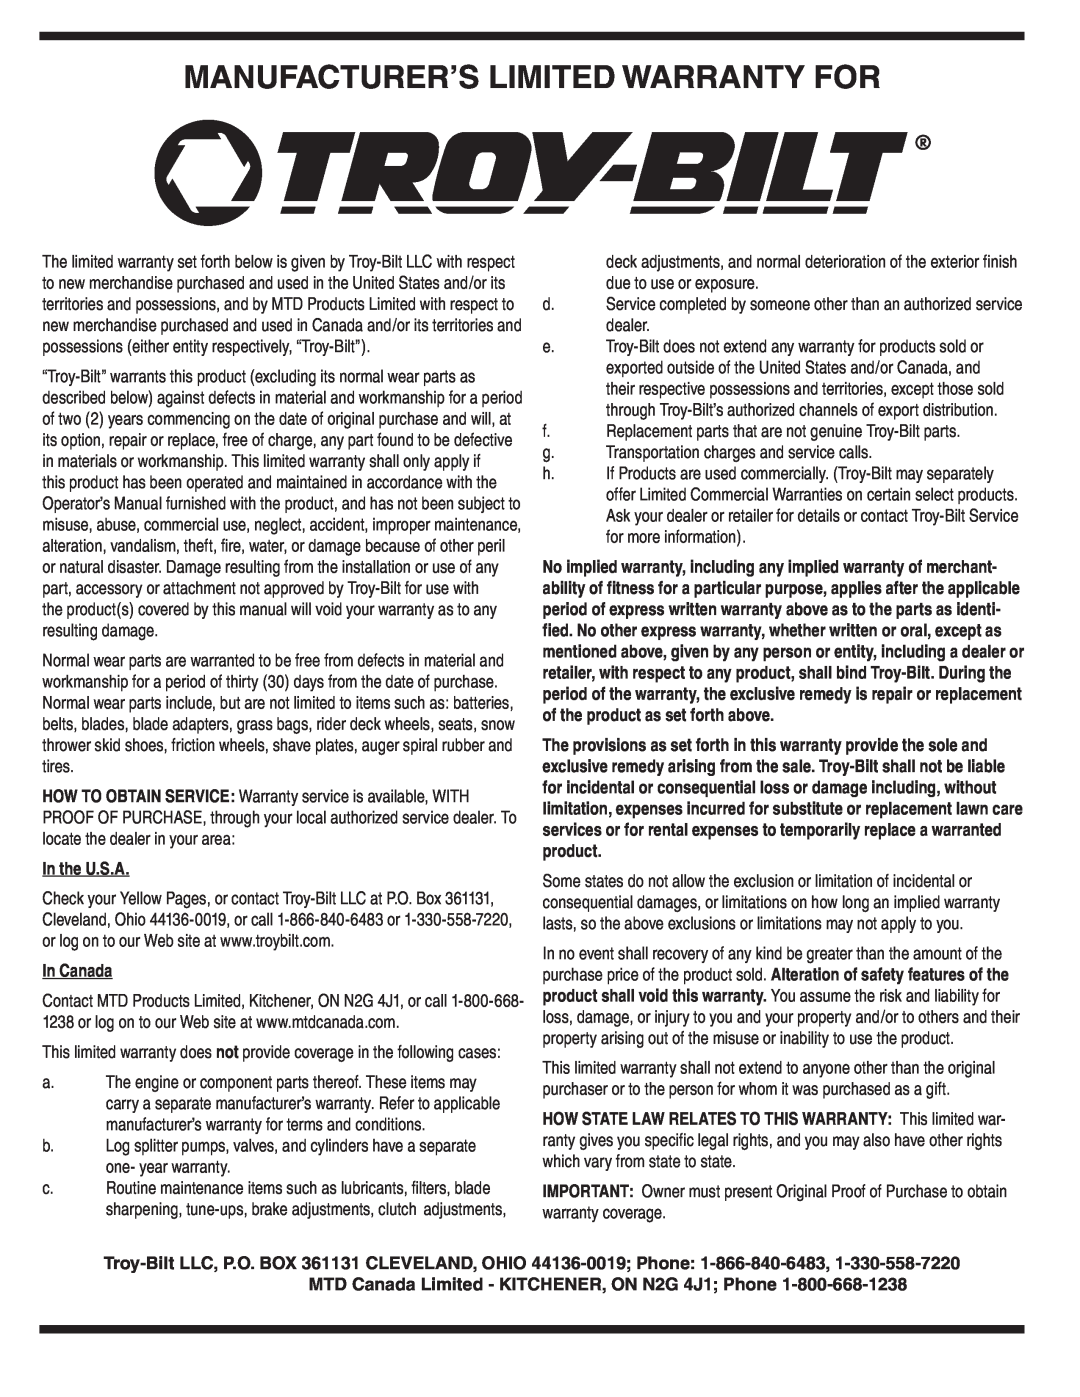 Troy-Bilt 414, 424 manual Manufacturer’S Limited Warranty For, In the U.S.A, In Canada 